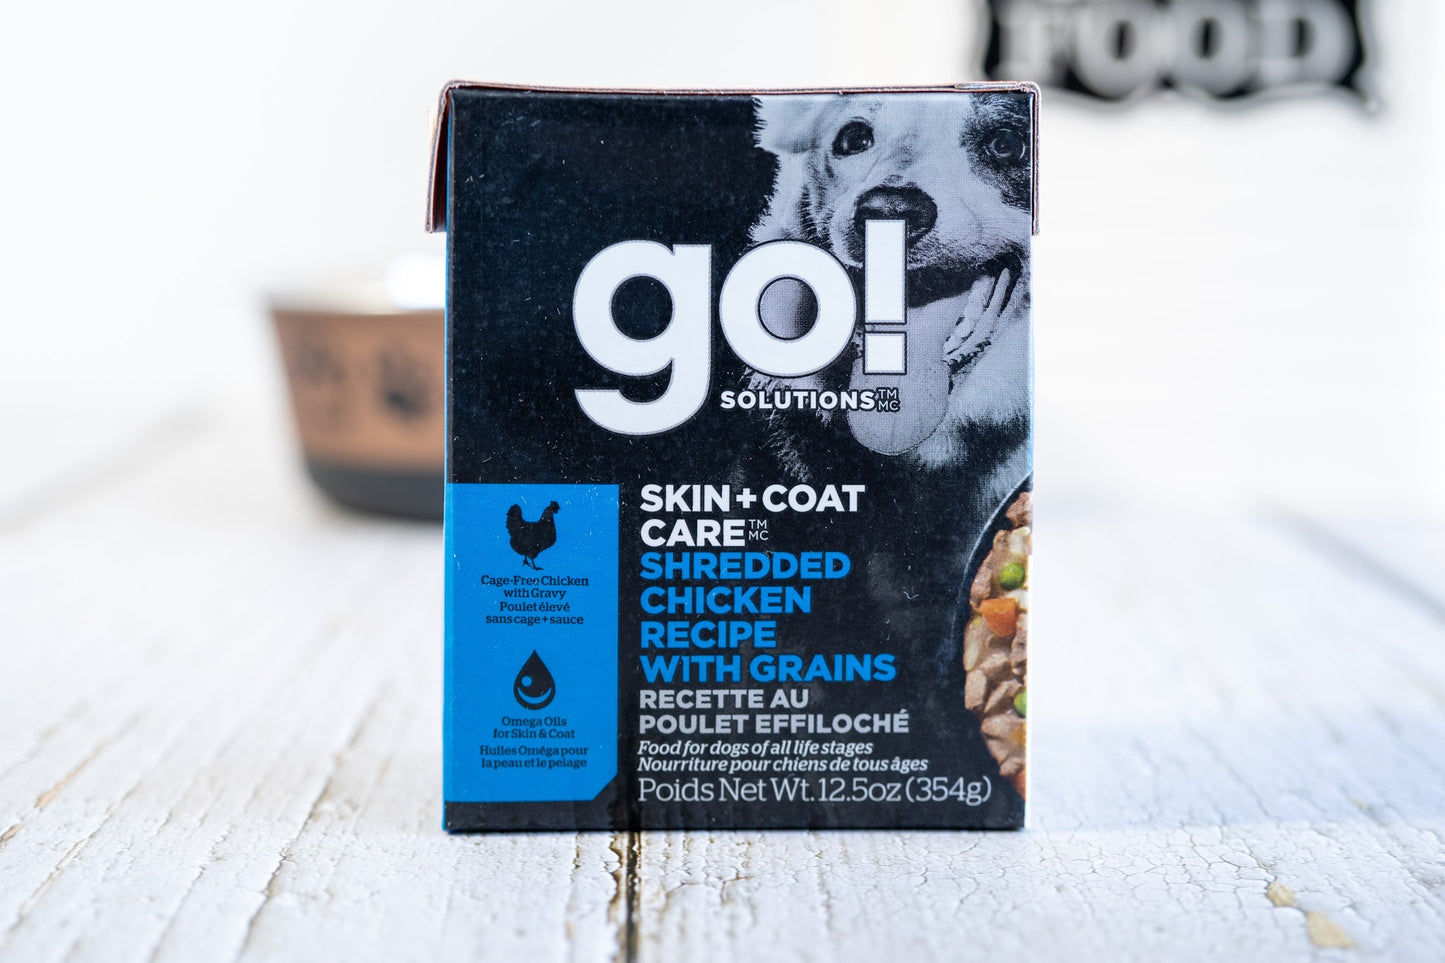 Shredded chicken Pate with grains for dogs of all life stages from Go Solutions!